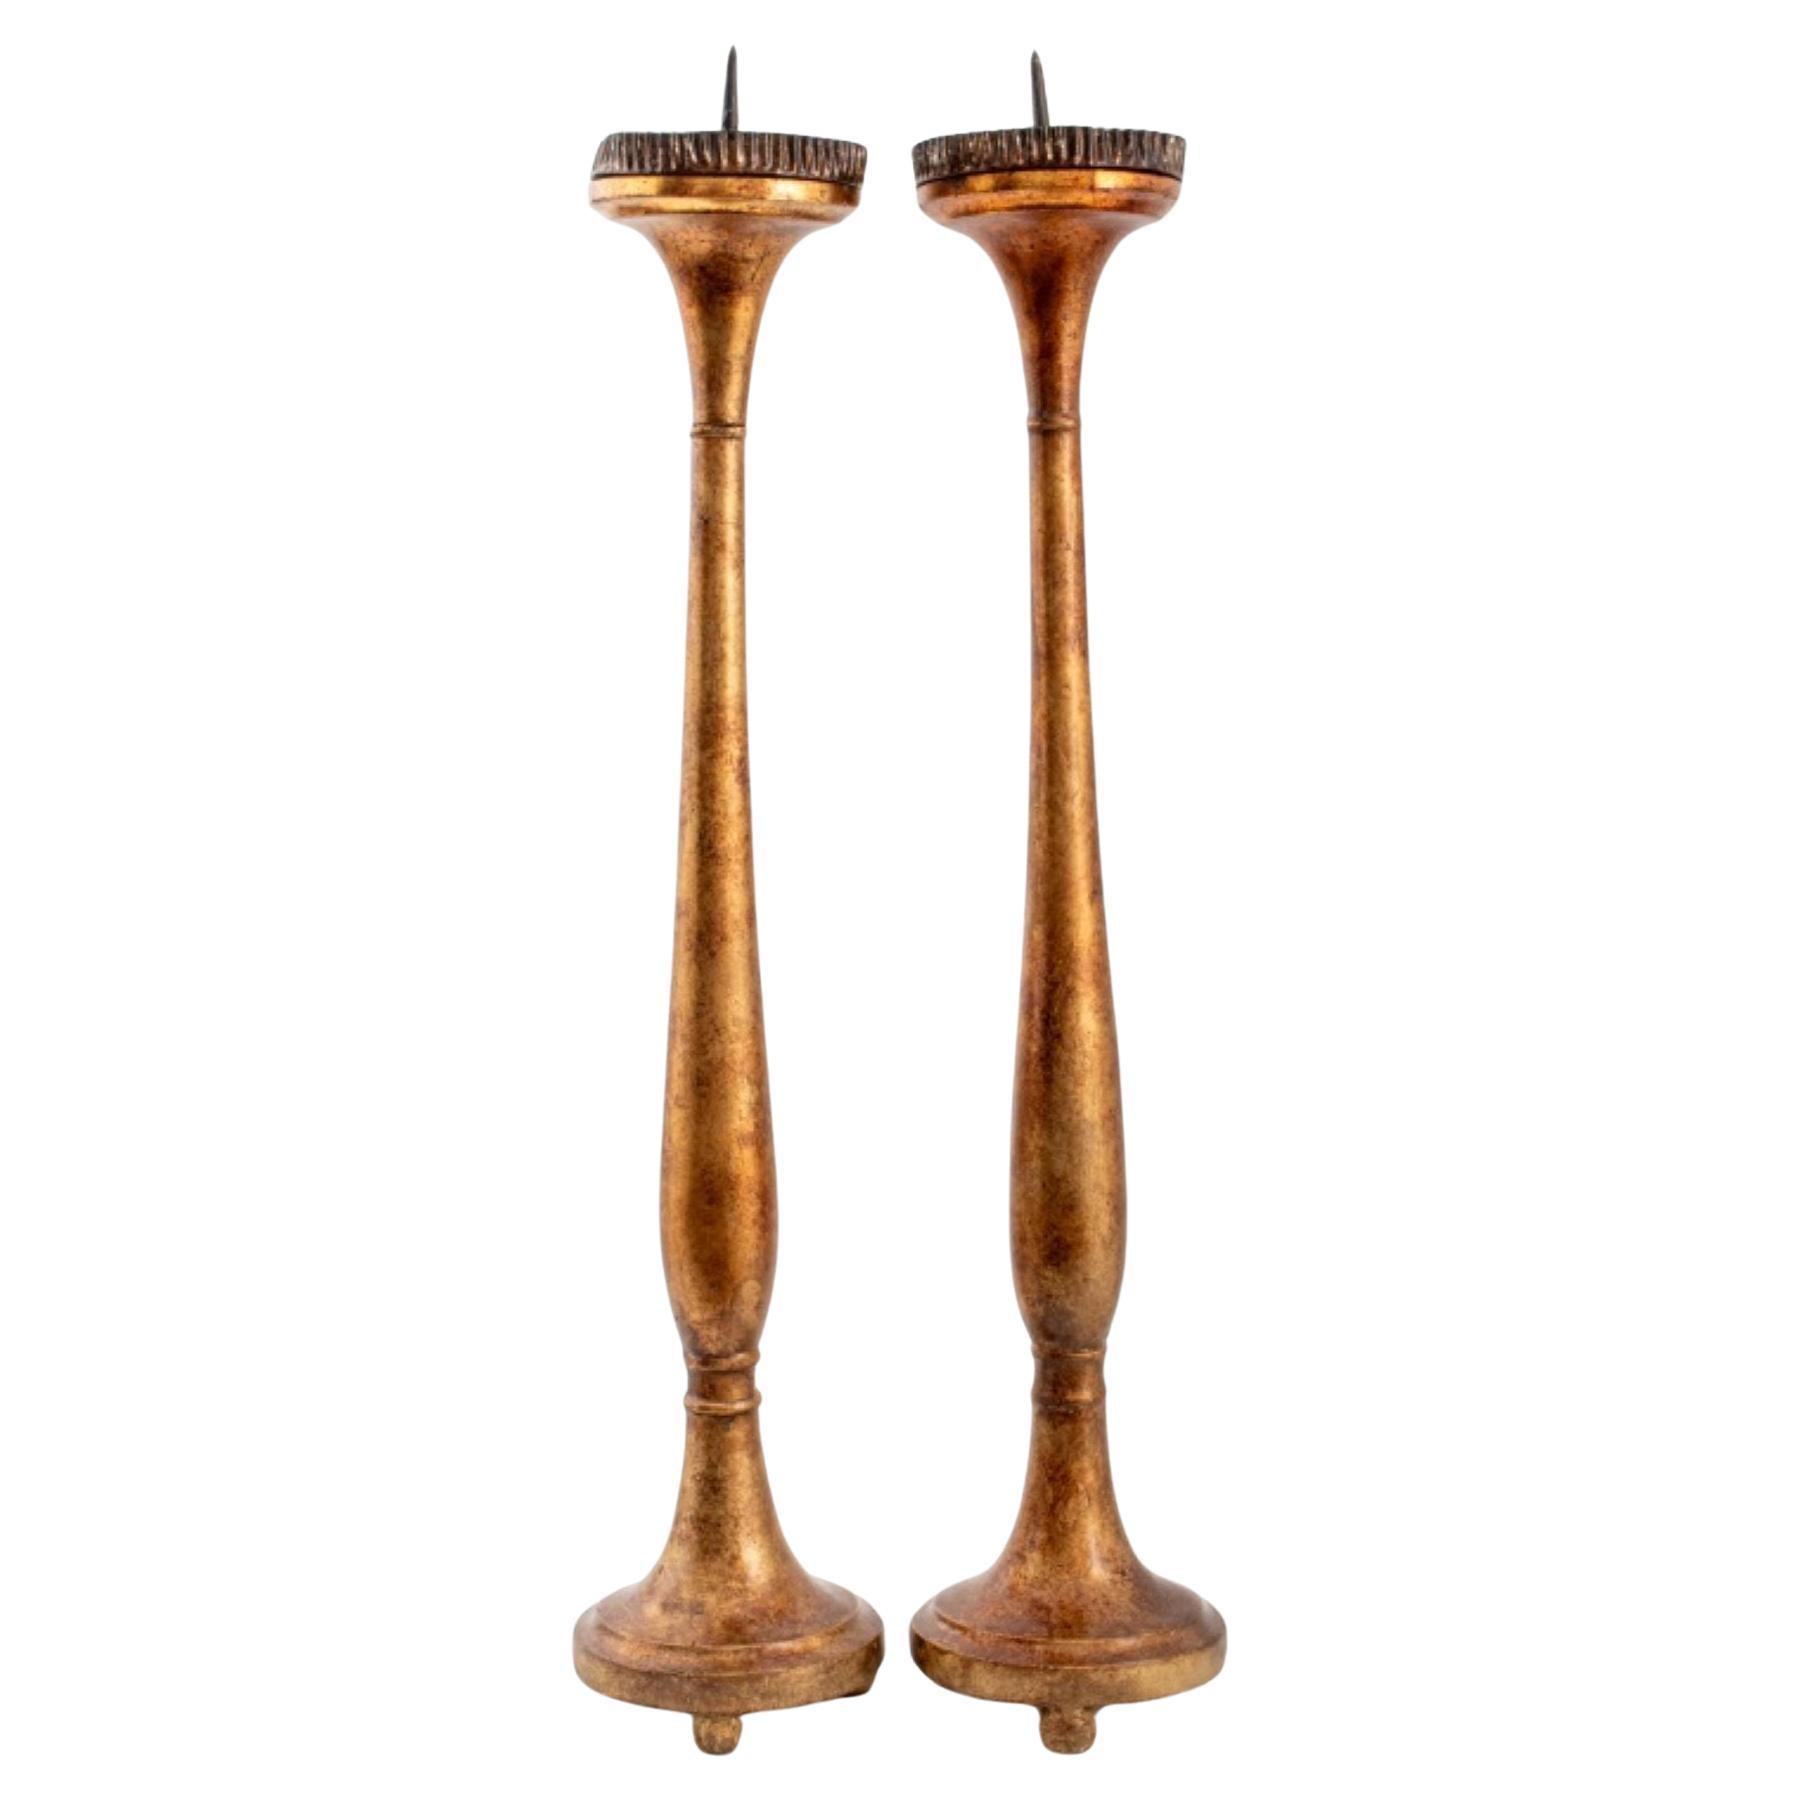 Italian Ecclesiastic Gilt Wood Candle Prickets, Pr For Sale